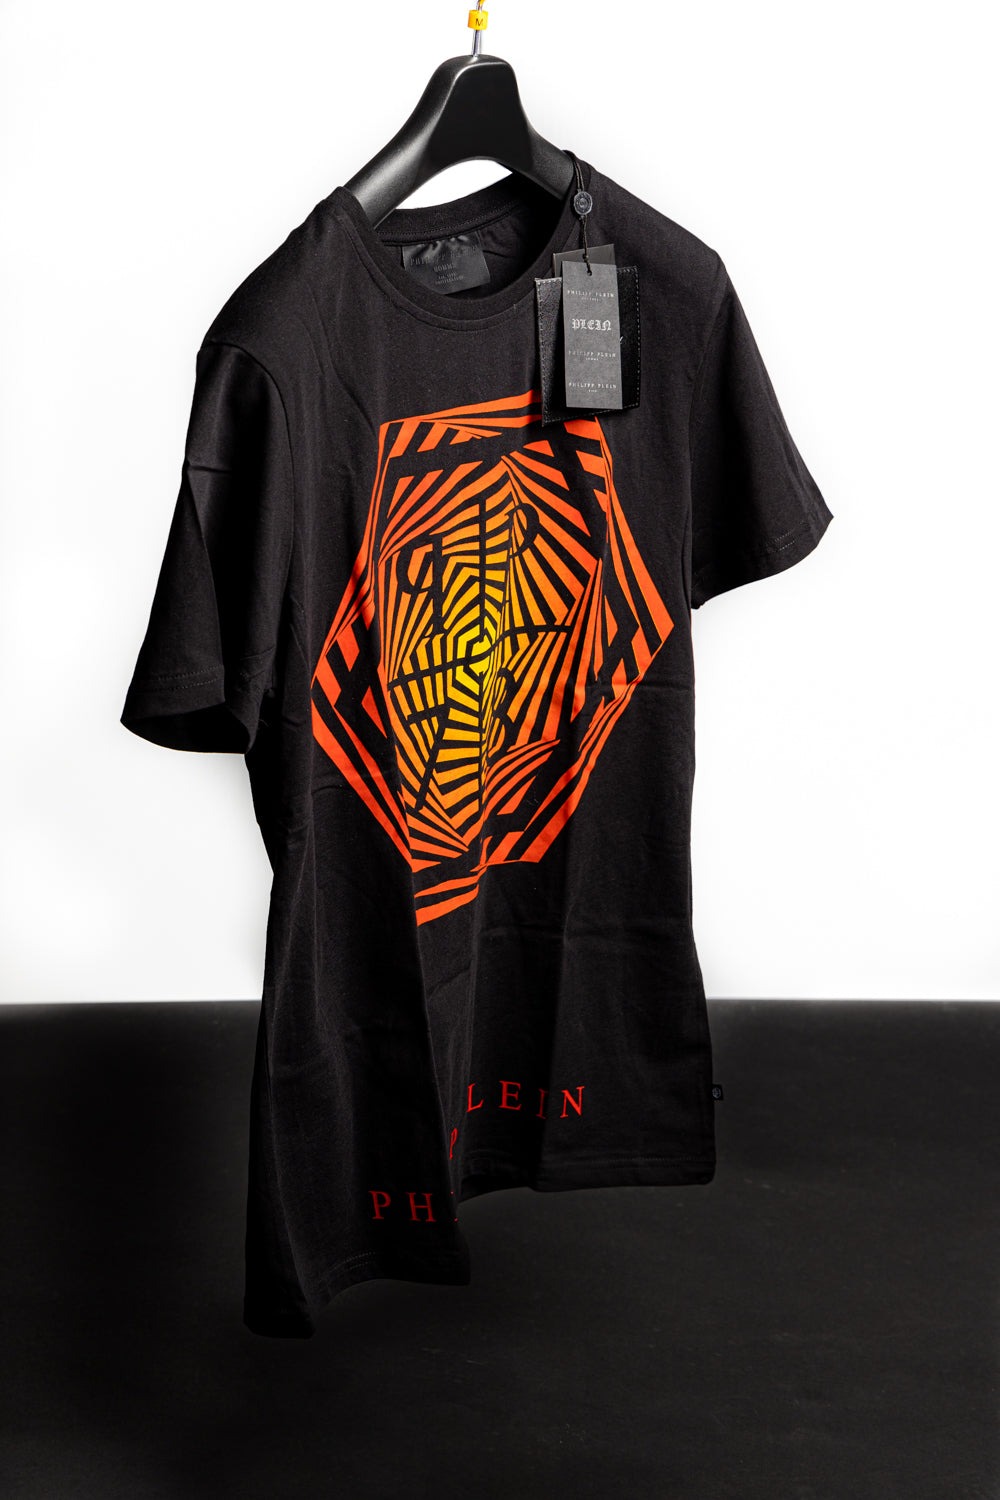 Philipp Plein SS PP T-shirt - Brands Off - Buy Online Luxury Clothing - Fashion Online Shop - Outlet Price